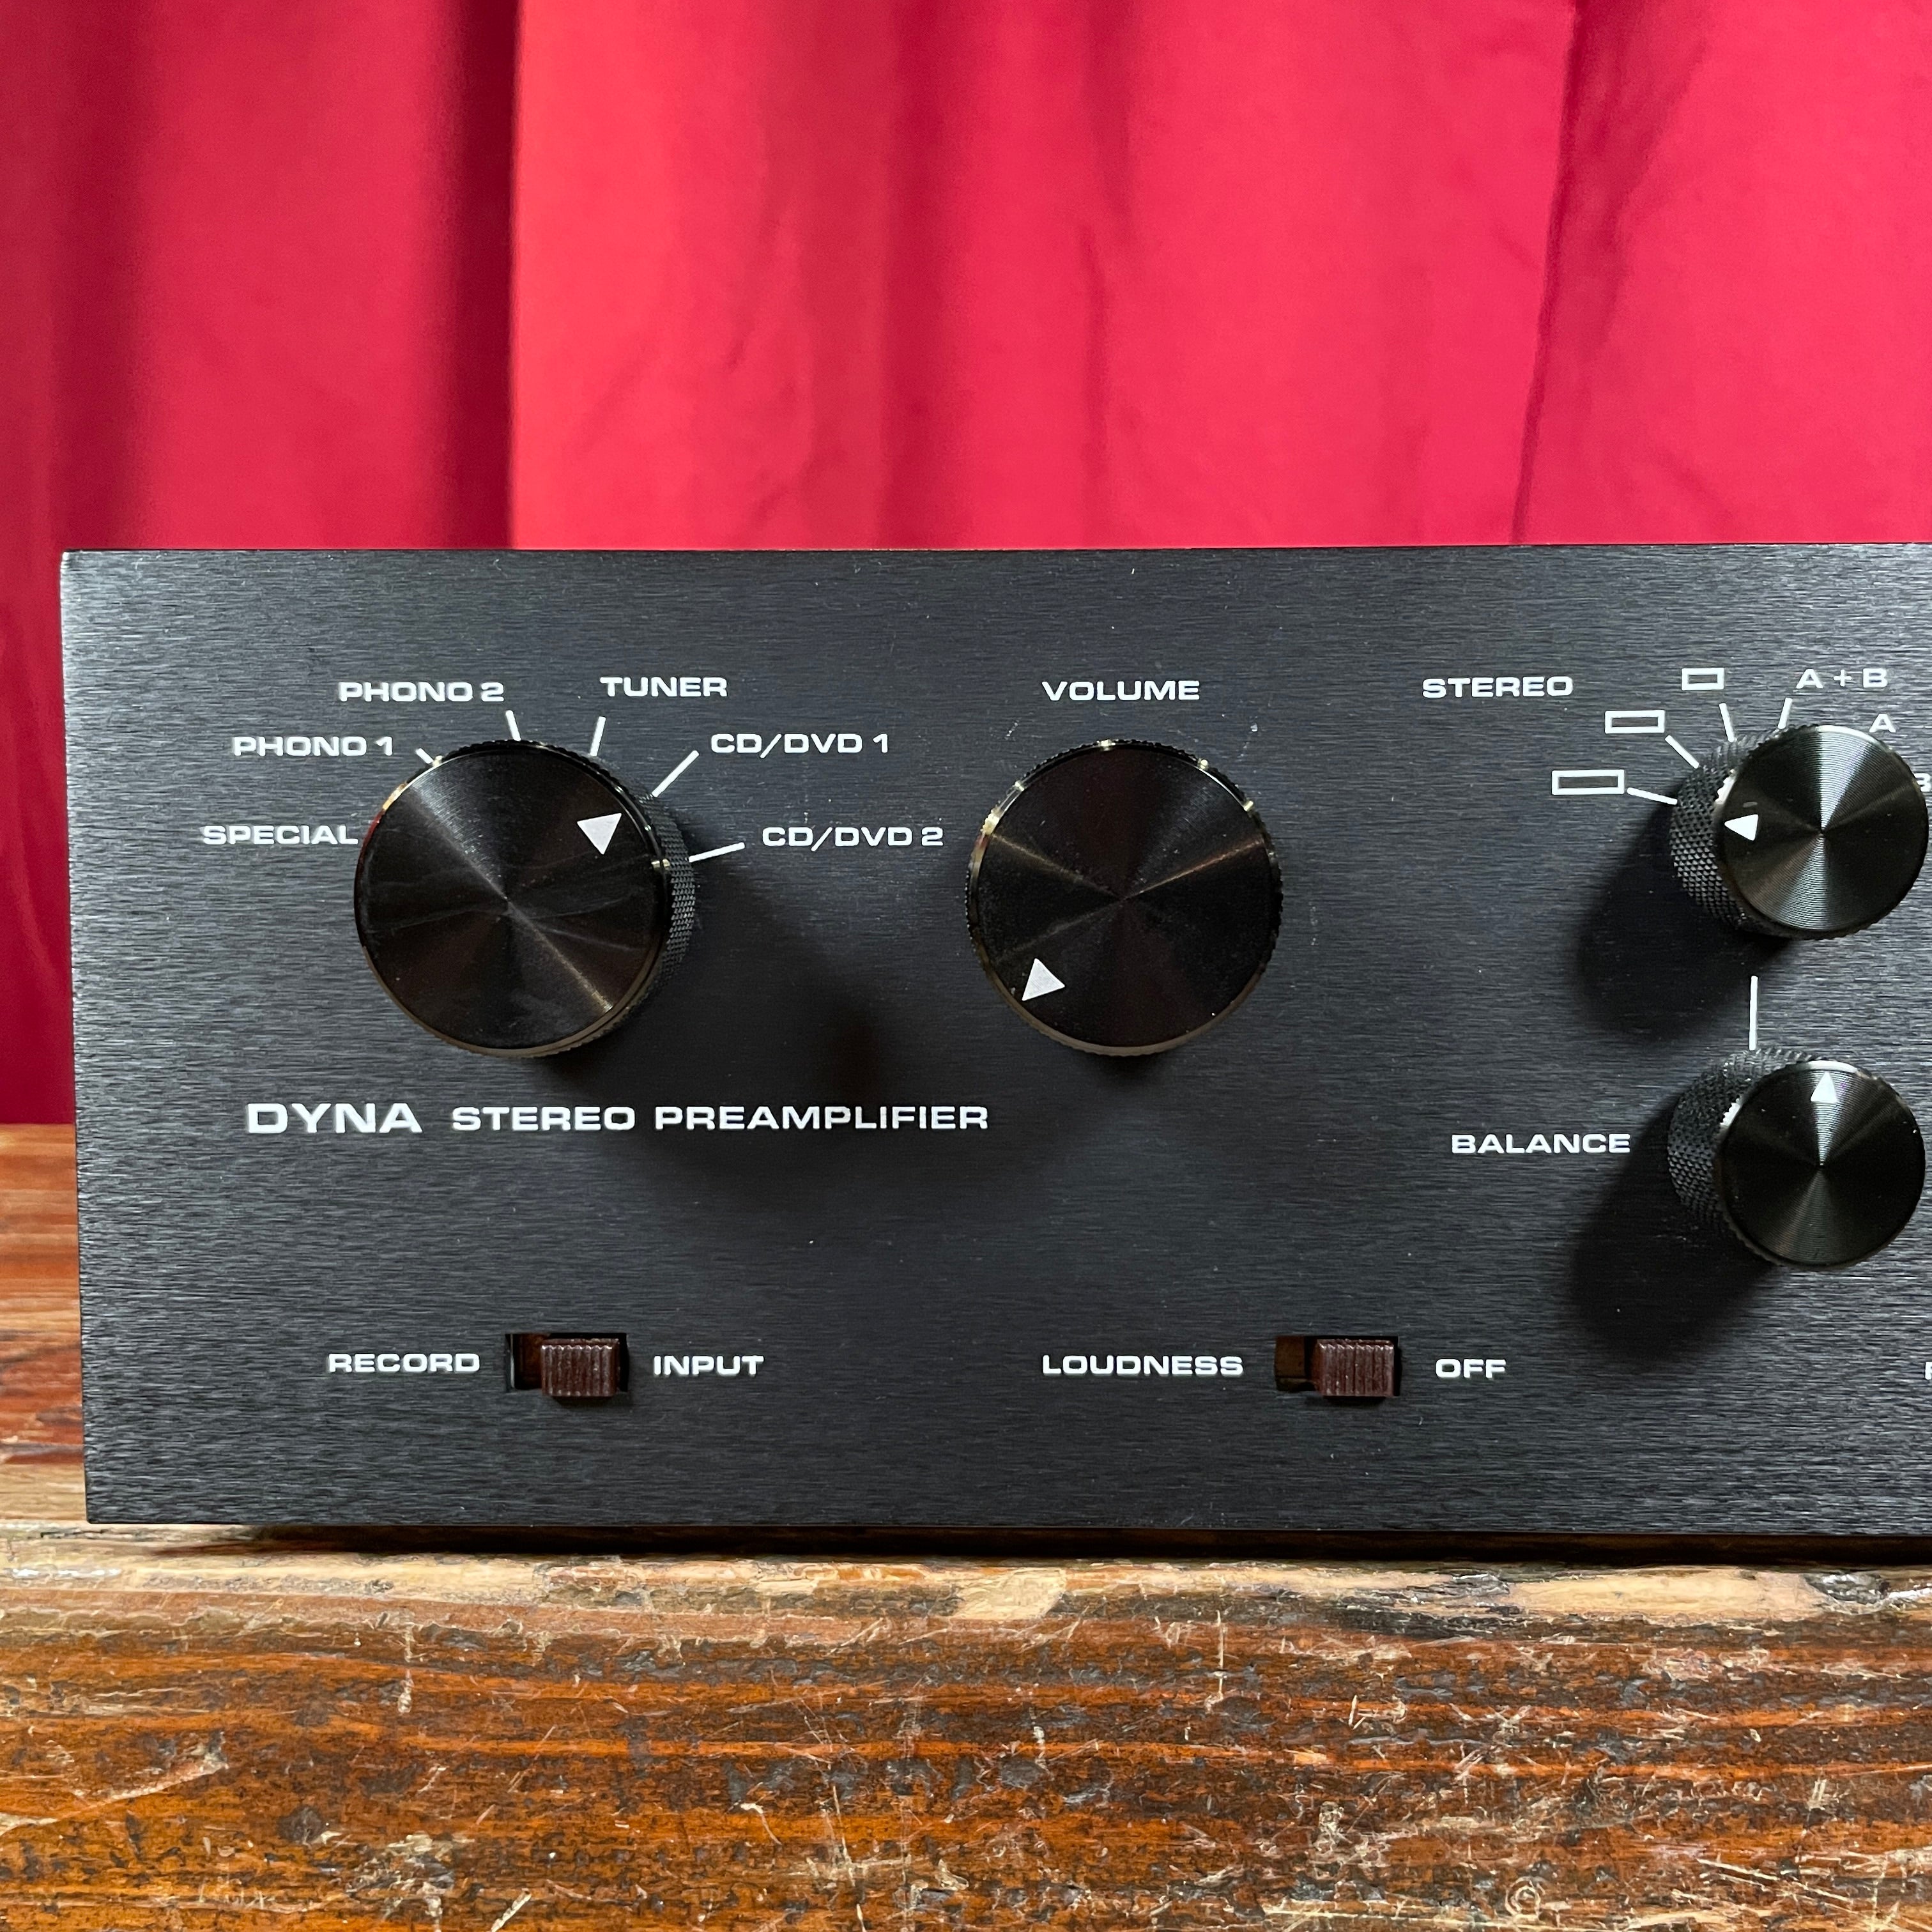 Dynaco Dyna PAS Stereophonic Preamplifer Upgraded Tube Stereo Preamp